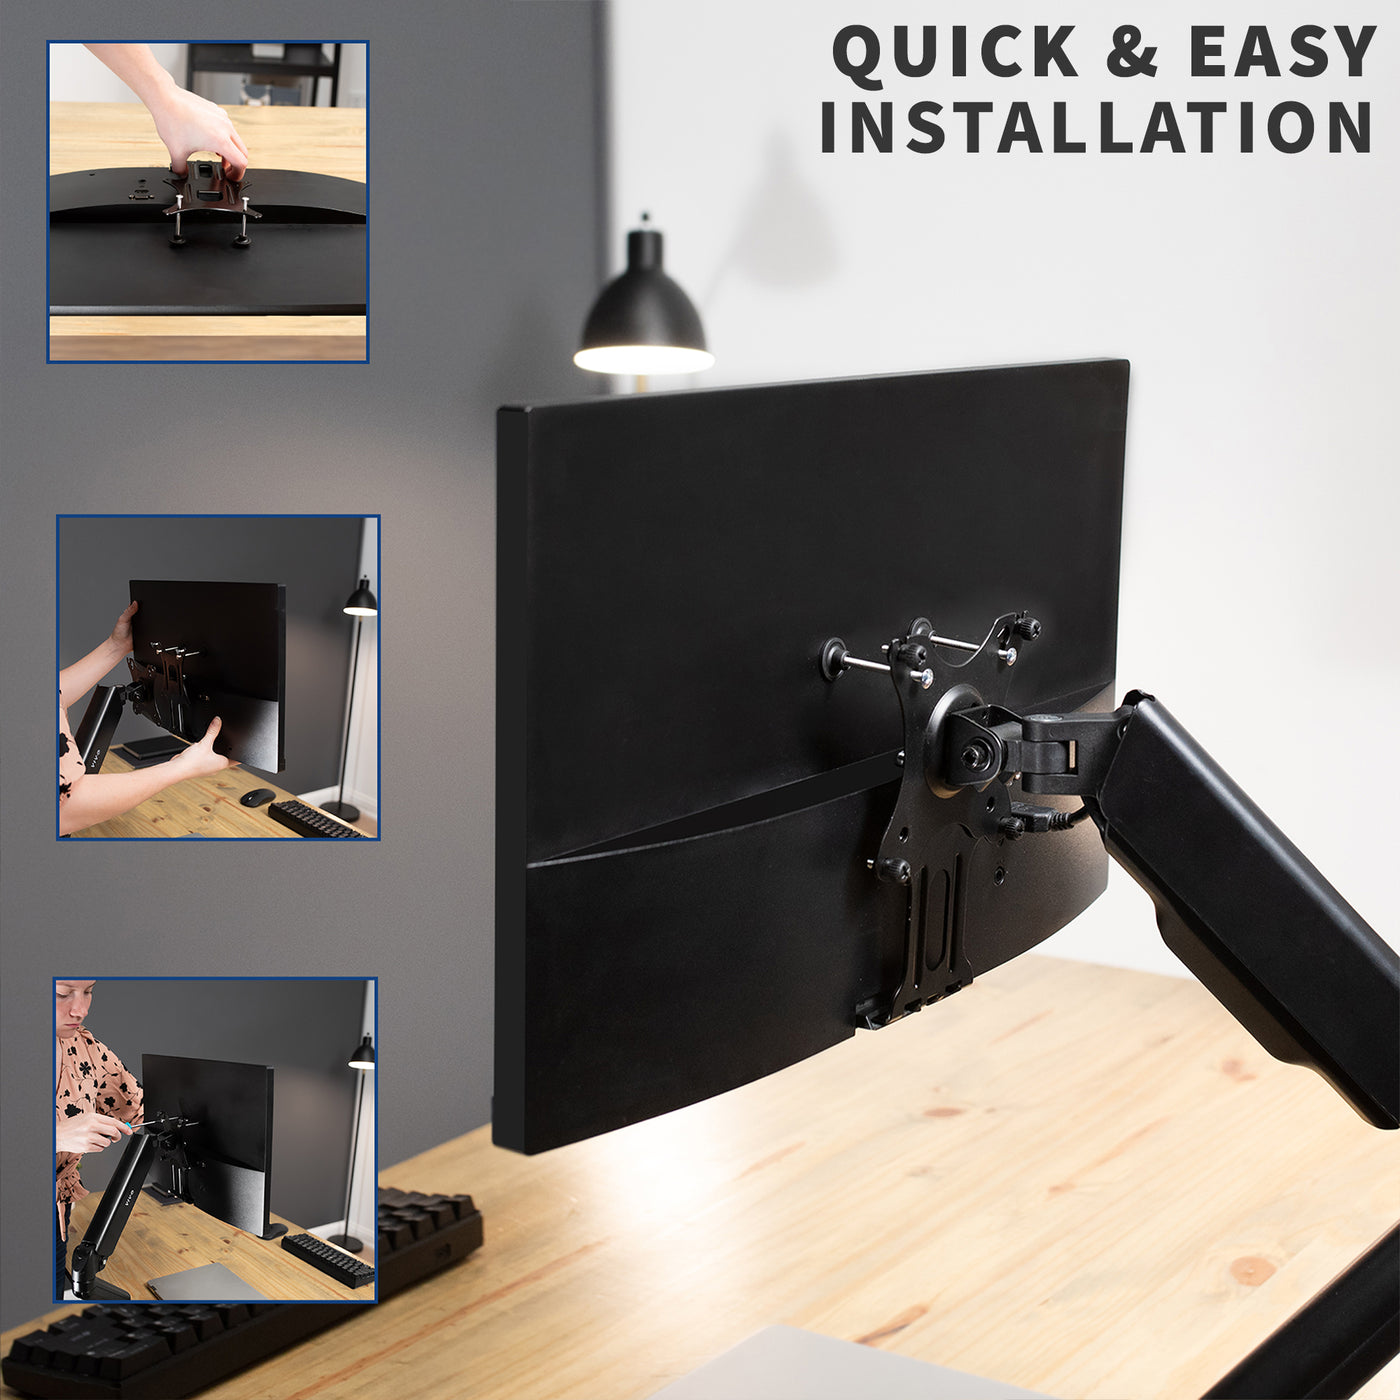 Quick and easy installation with a manual screwdriver.